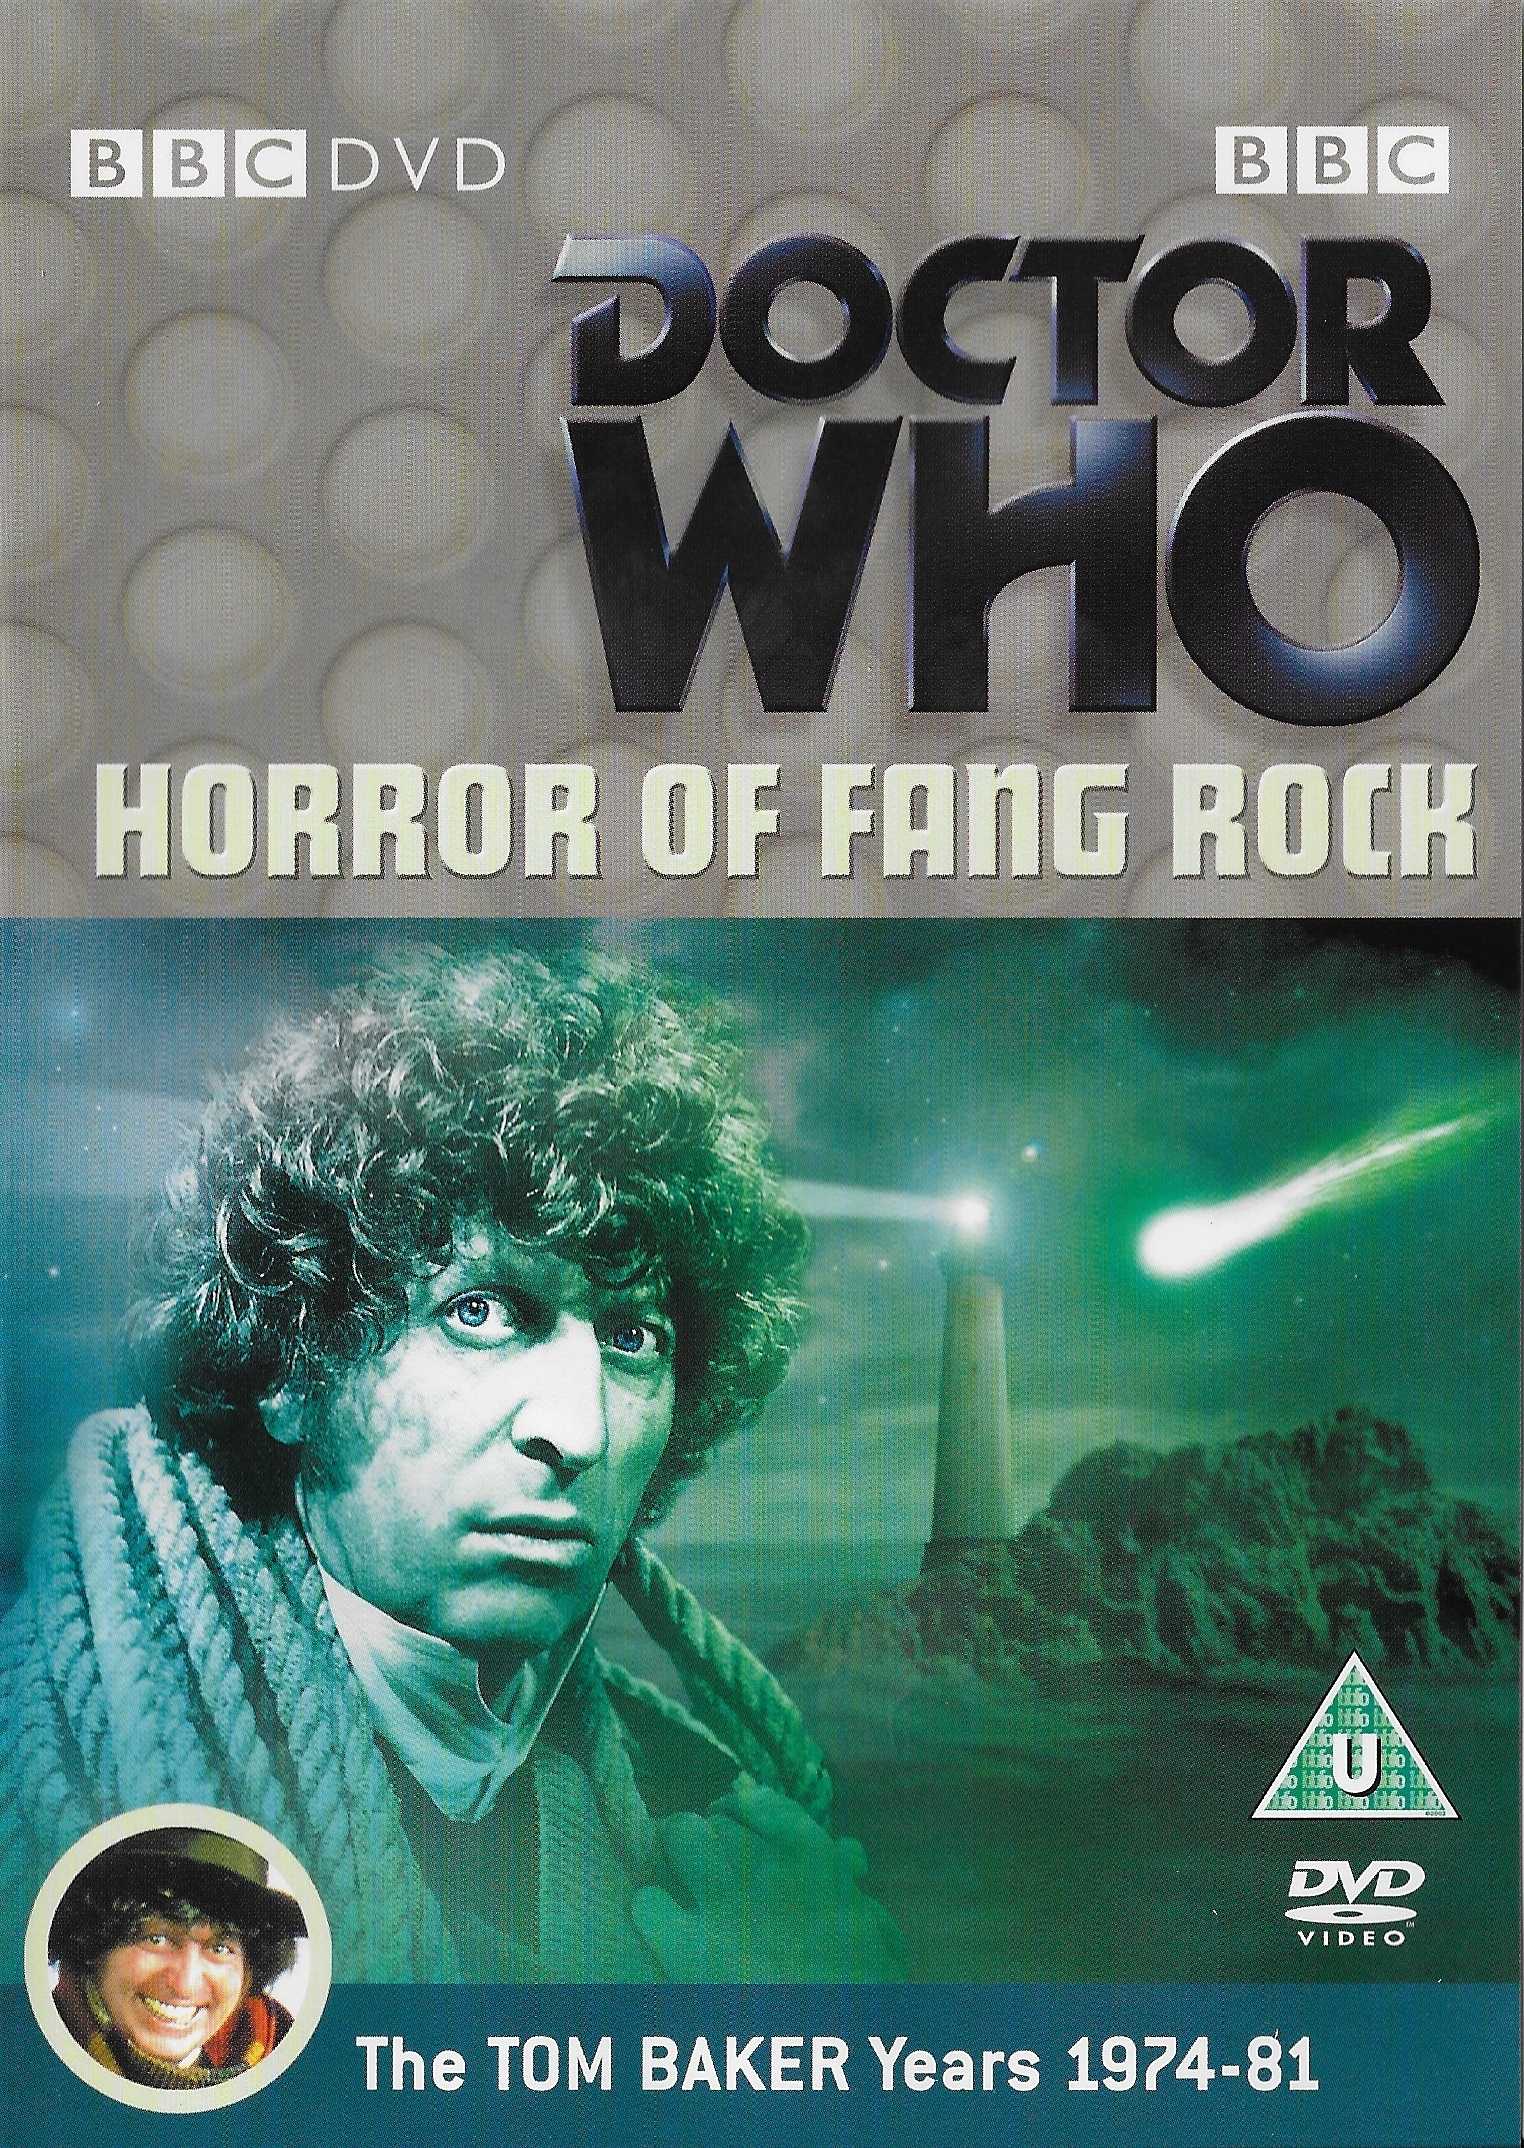 Picture of BBCDVD 1356 Doctor Who - Horror of fang rock by artist Terrance Dicks from the BBC dvds - Records and Tapes library